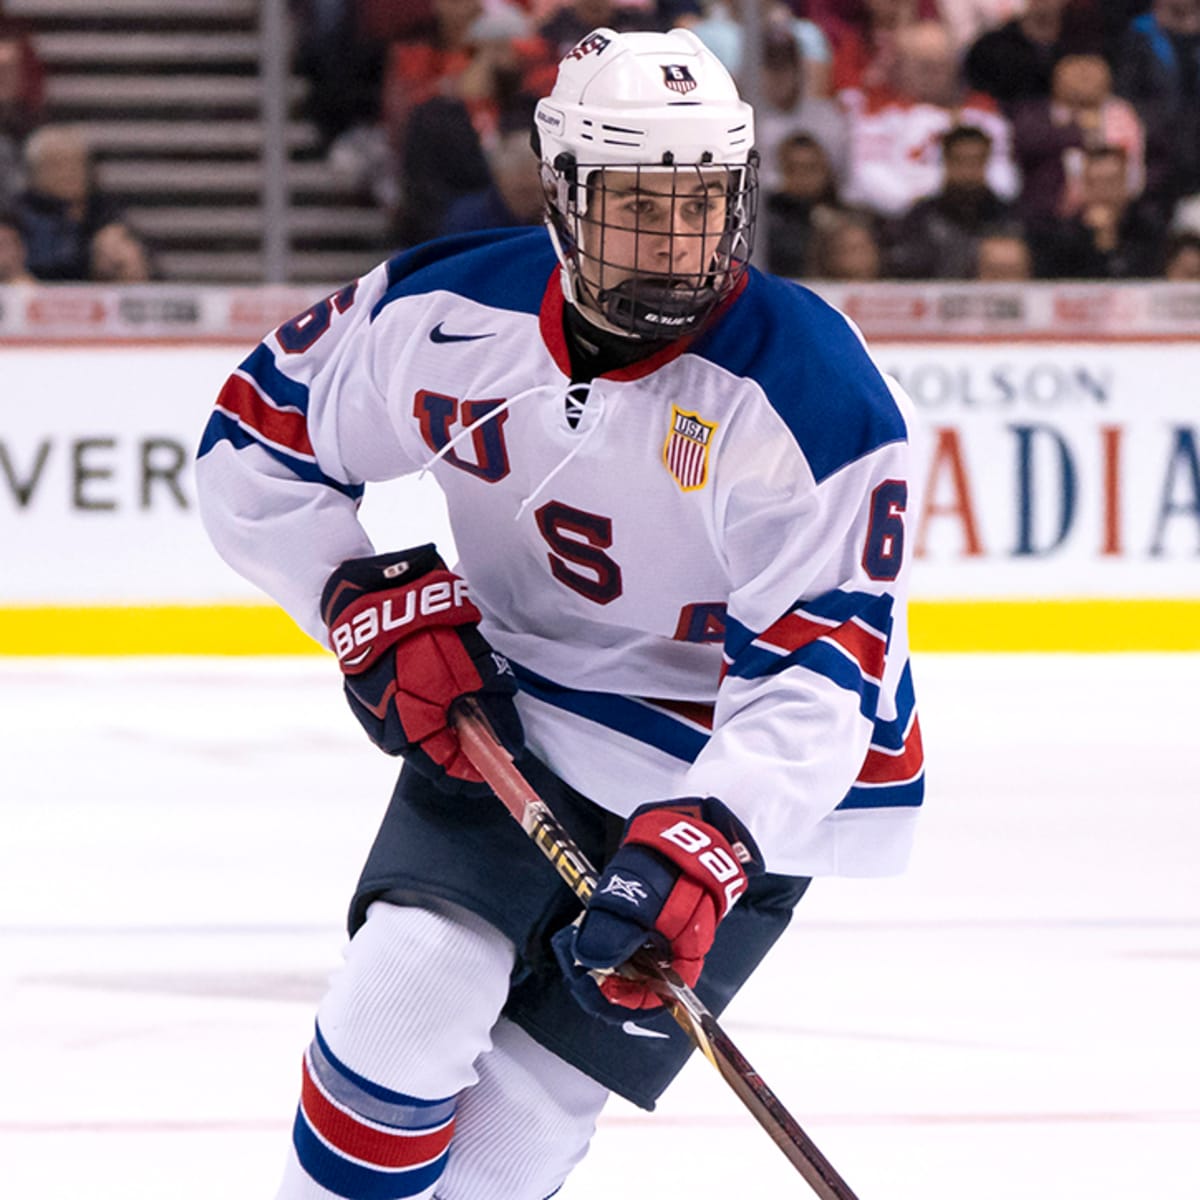 2019 Draft Diary: Jack Hughes Projected No. 1 pick discusses Draft Lottery,  World Under-18 tournament, brother Quinn making NHL debut